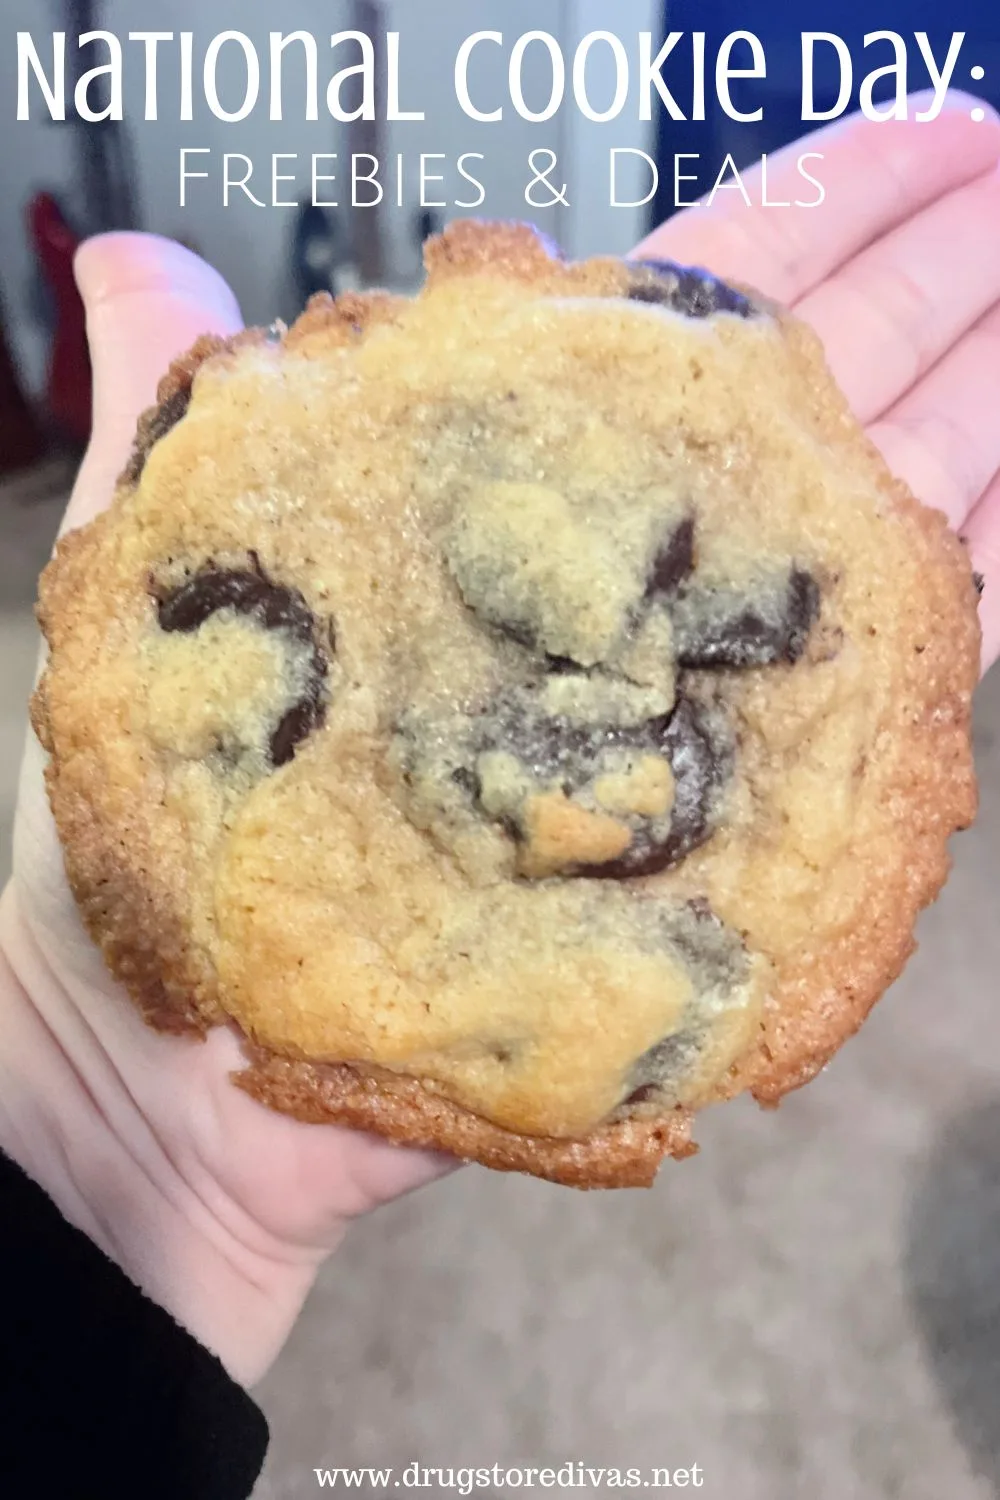 A hand holding a fresh baked cookie with the words 